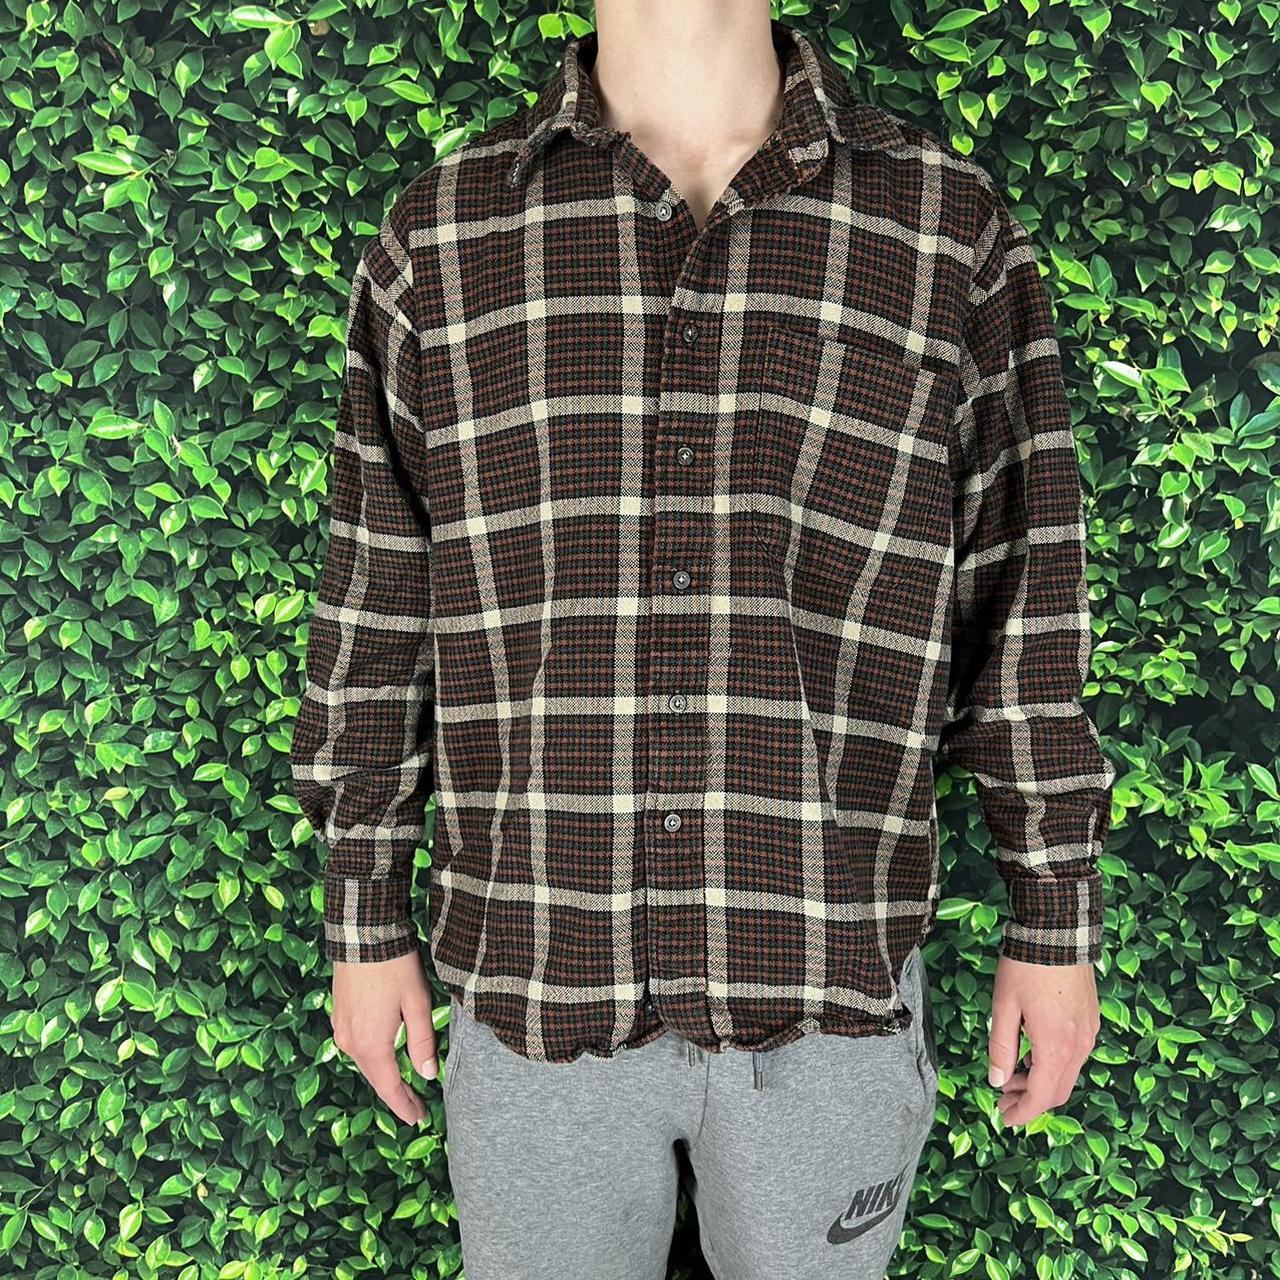 Product Image 2 - Earth tone skater dad flannel